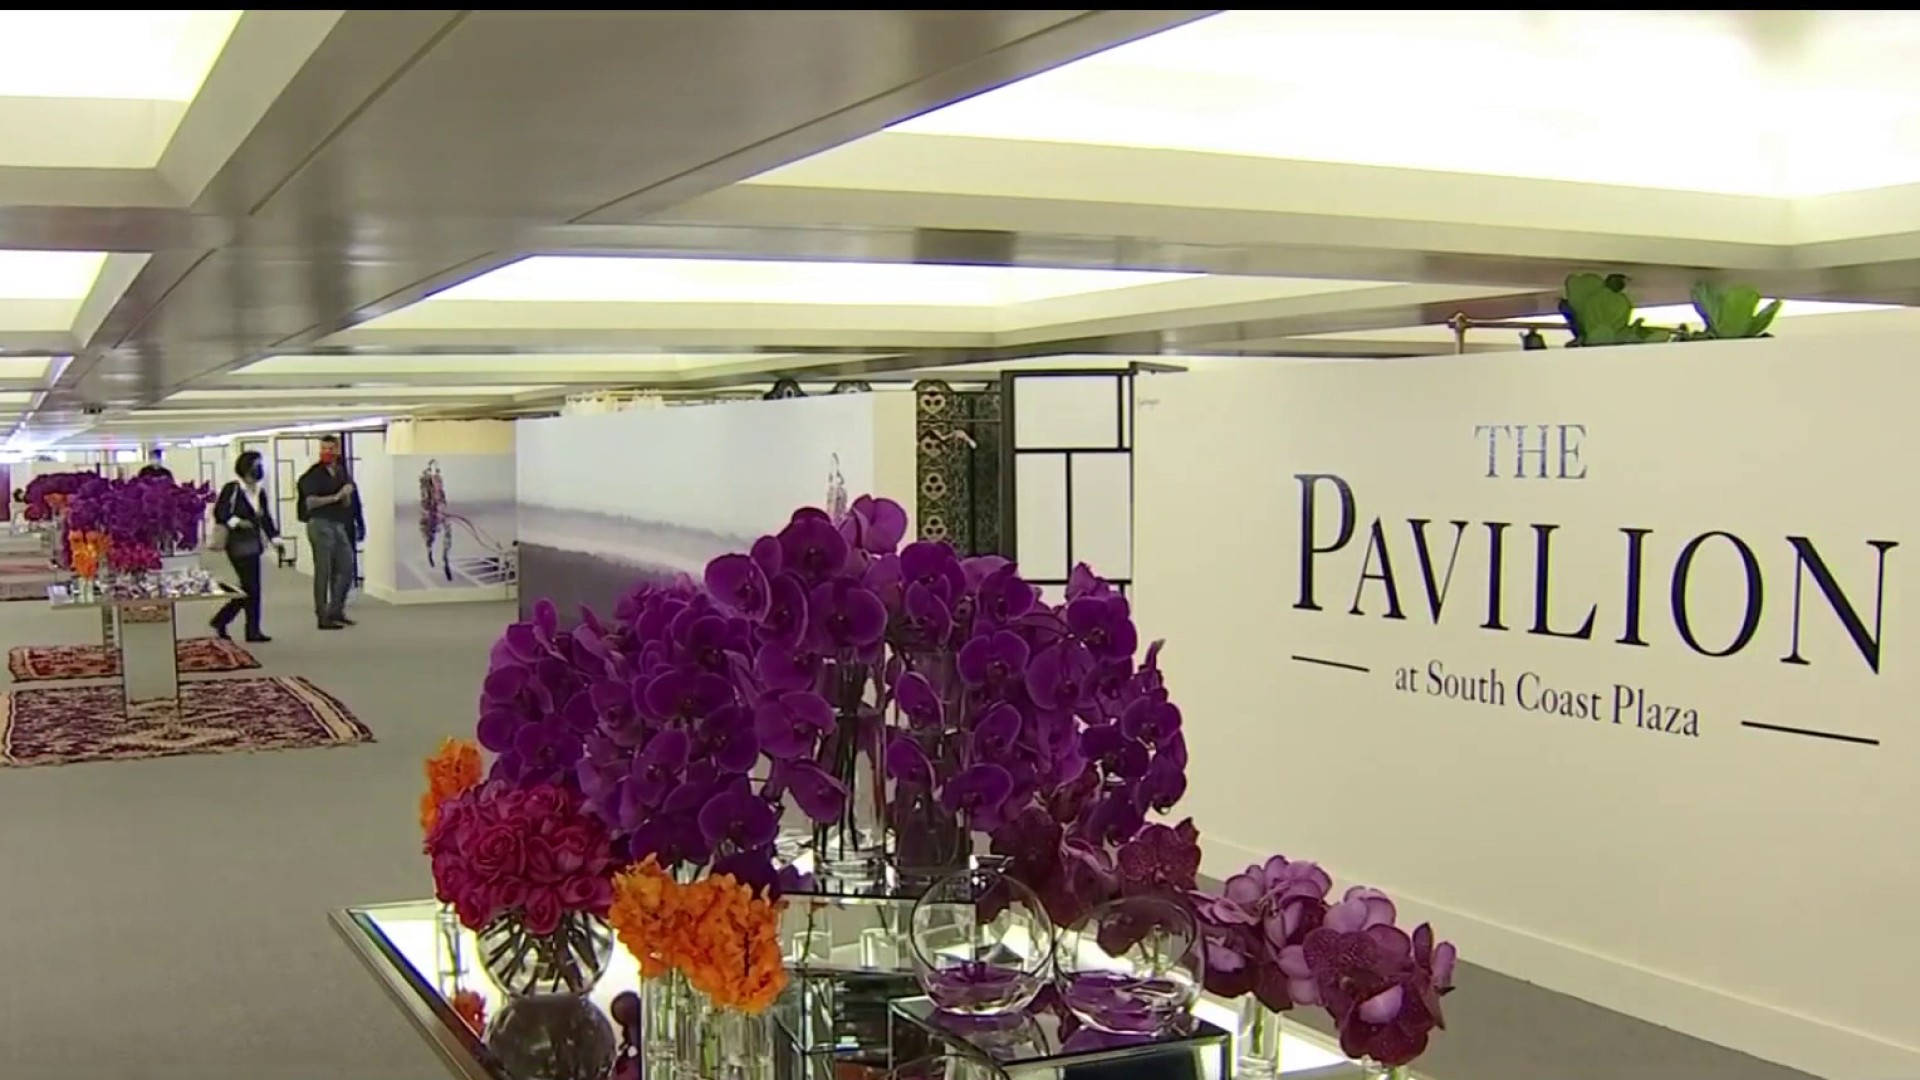 South Coast Plaza In Costa Mesa Welcomes Indoor Shoppers Monday - CBS Los  Angeles